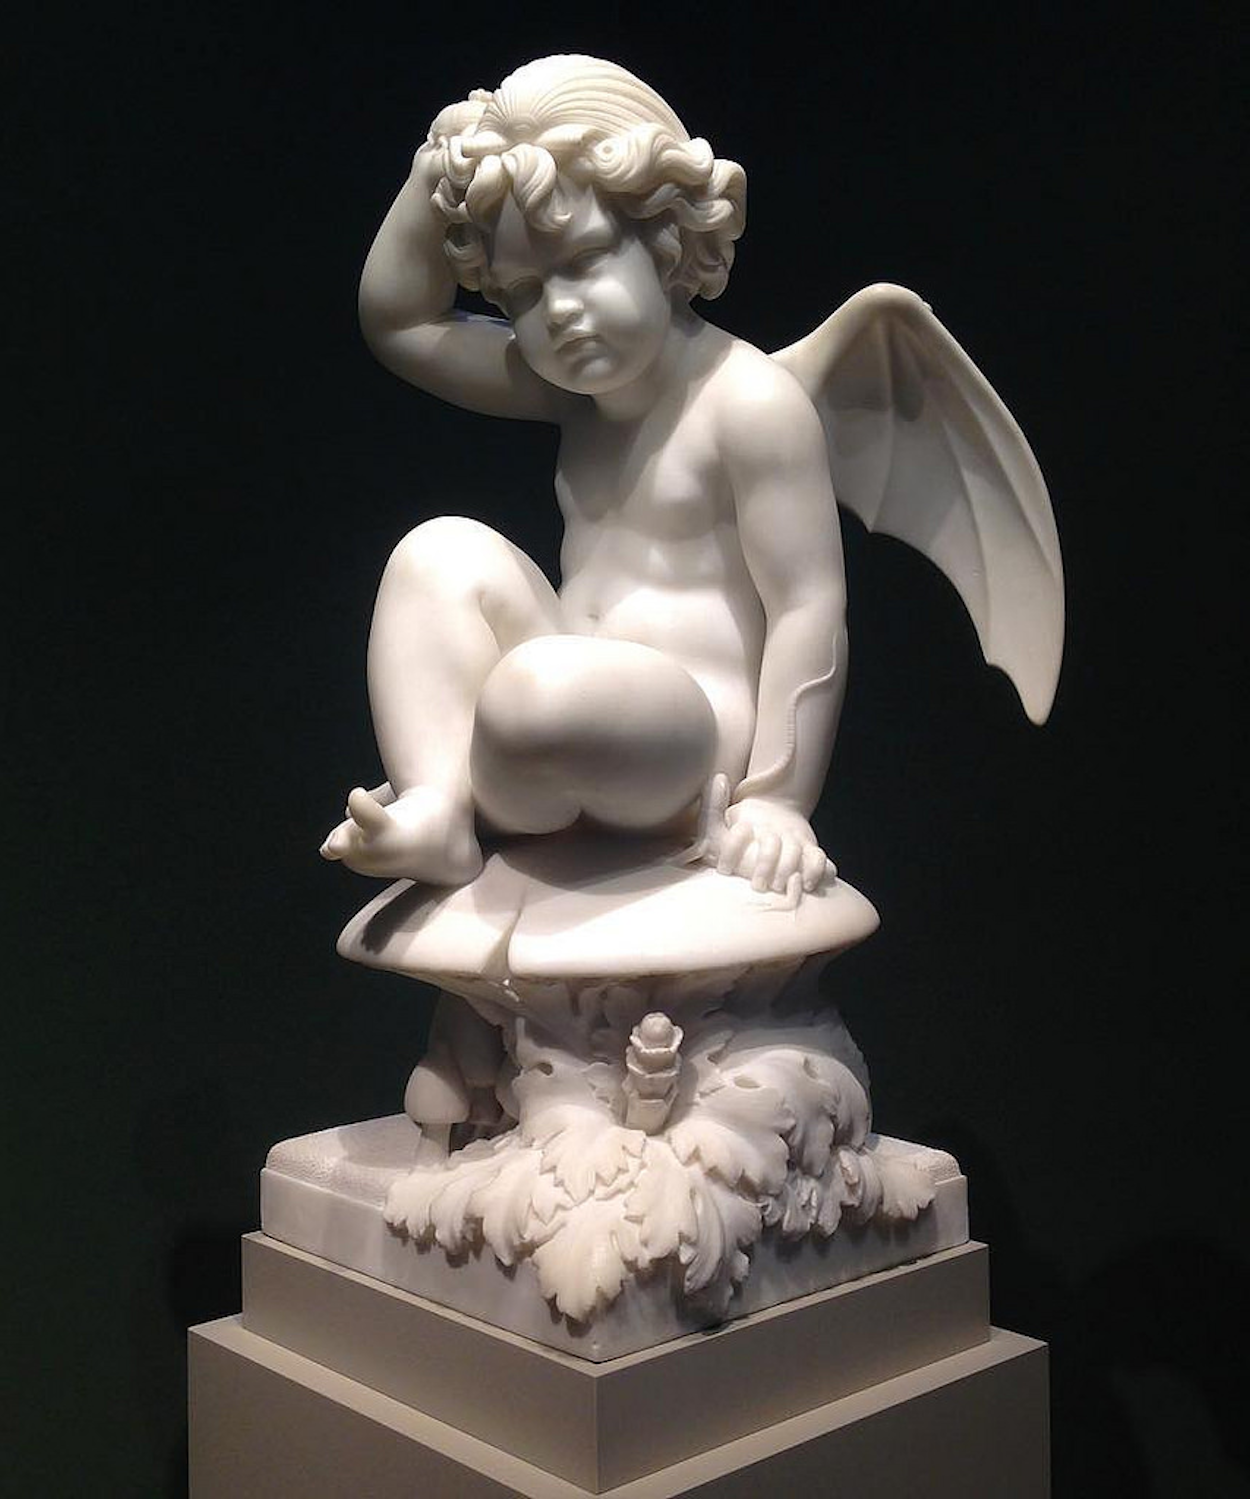 Puck by Harriet Goodhue Hosmer - modeled 1854, carved 1856 - 77.5 x 42.1 x 49.9 cm Smithsonian American Art Museum